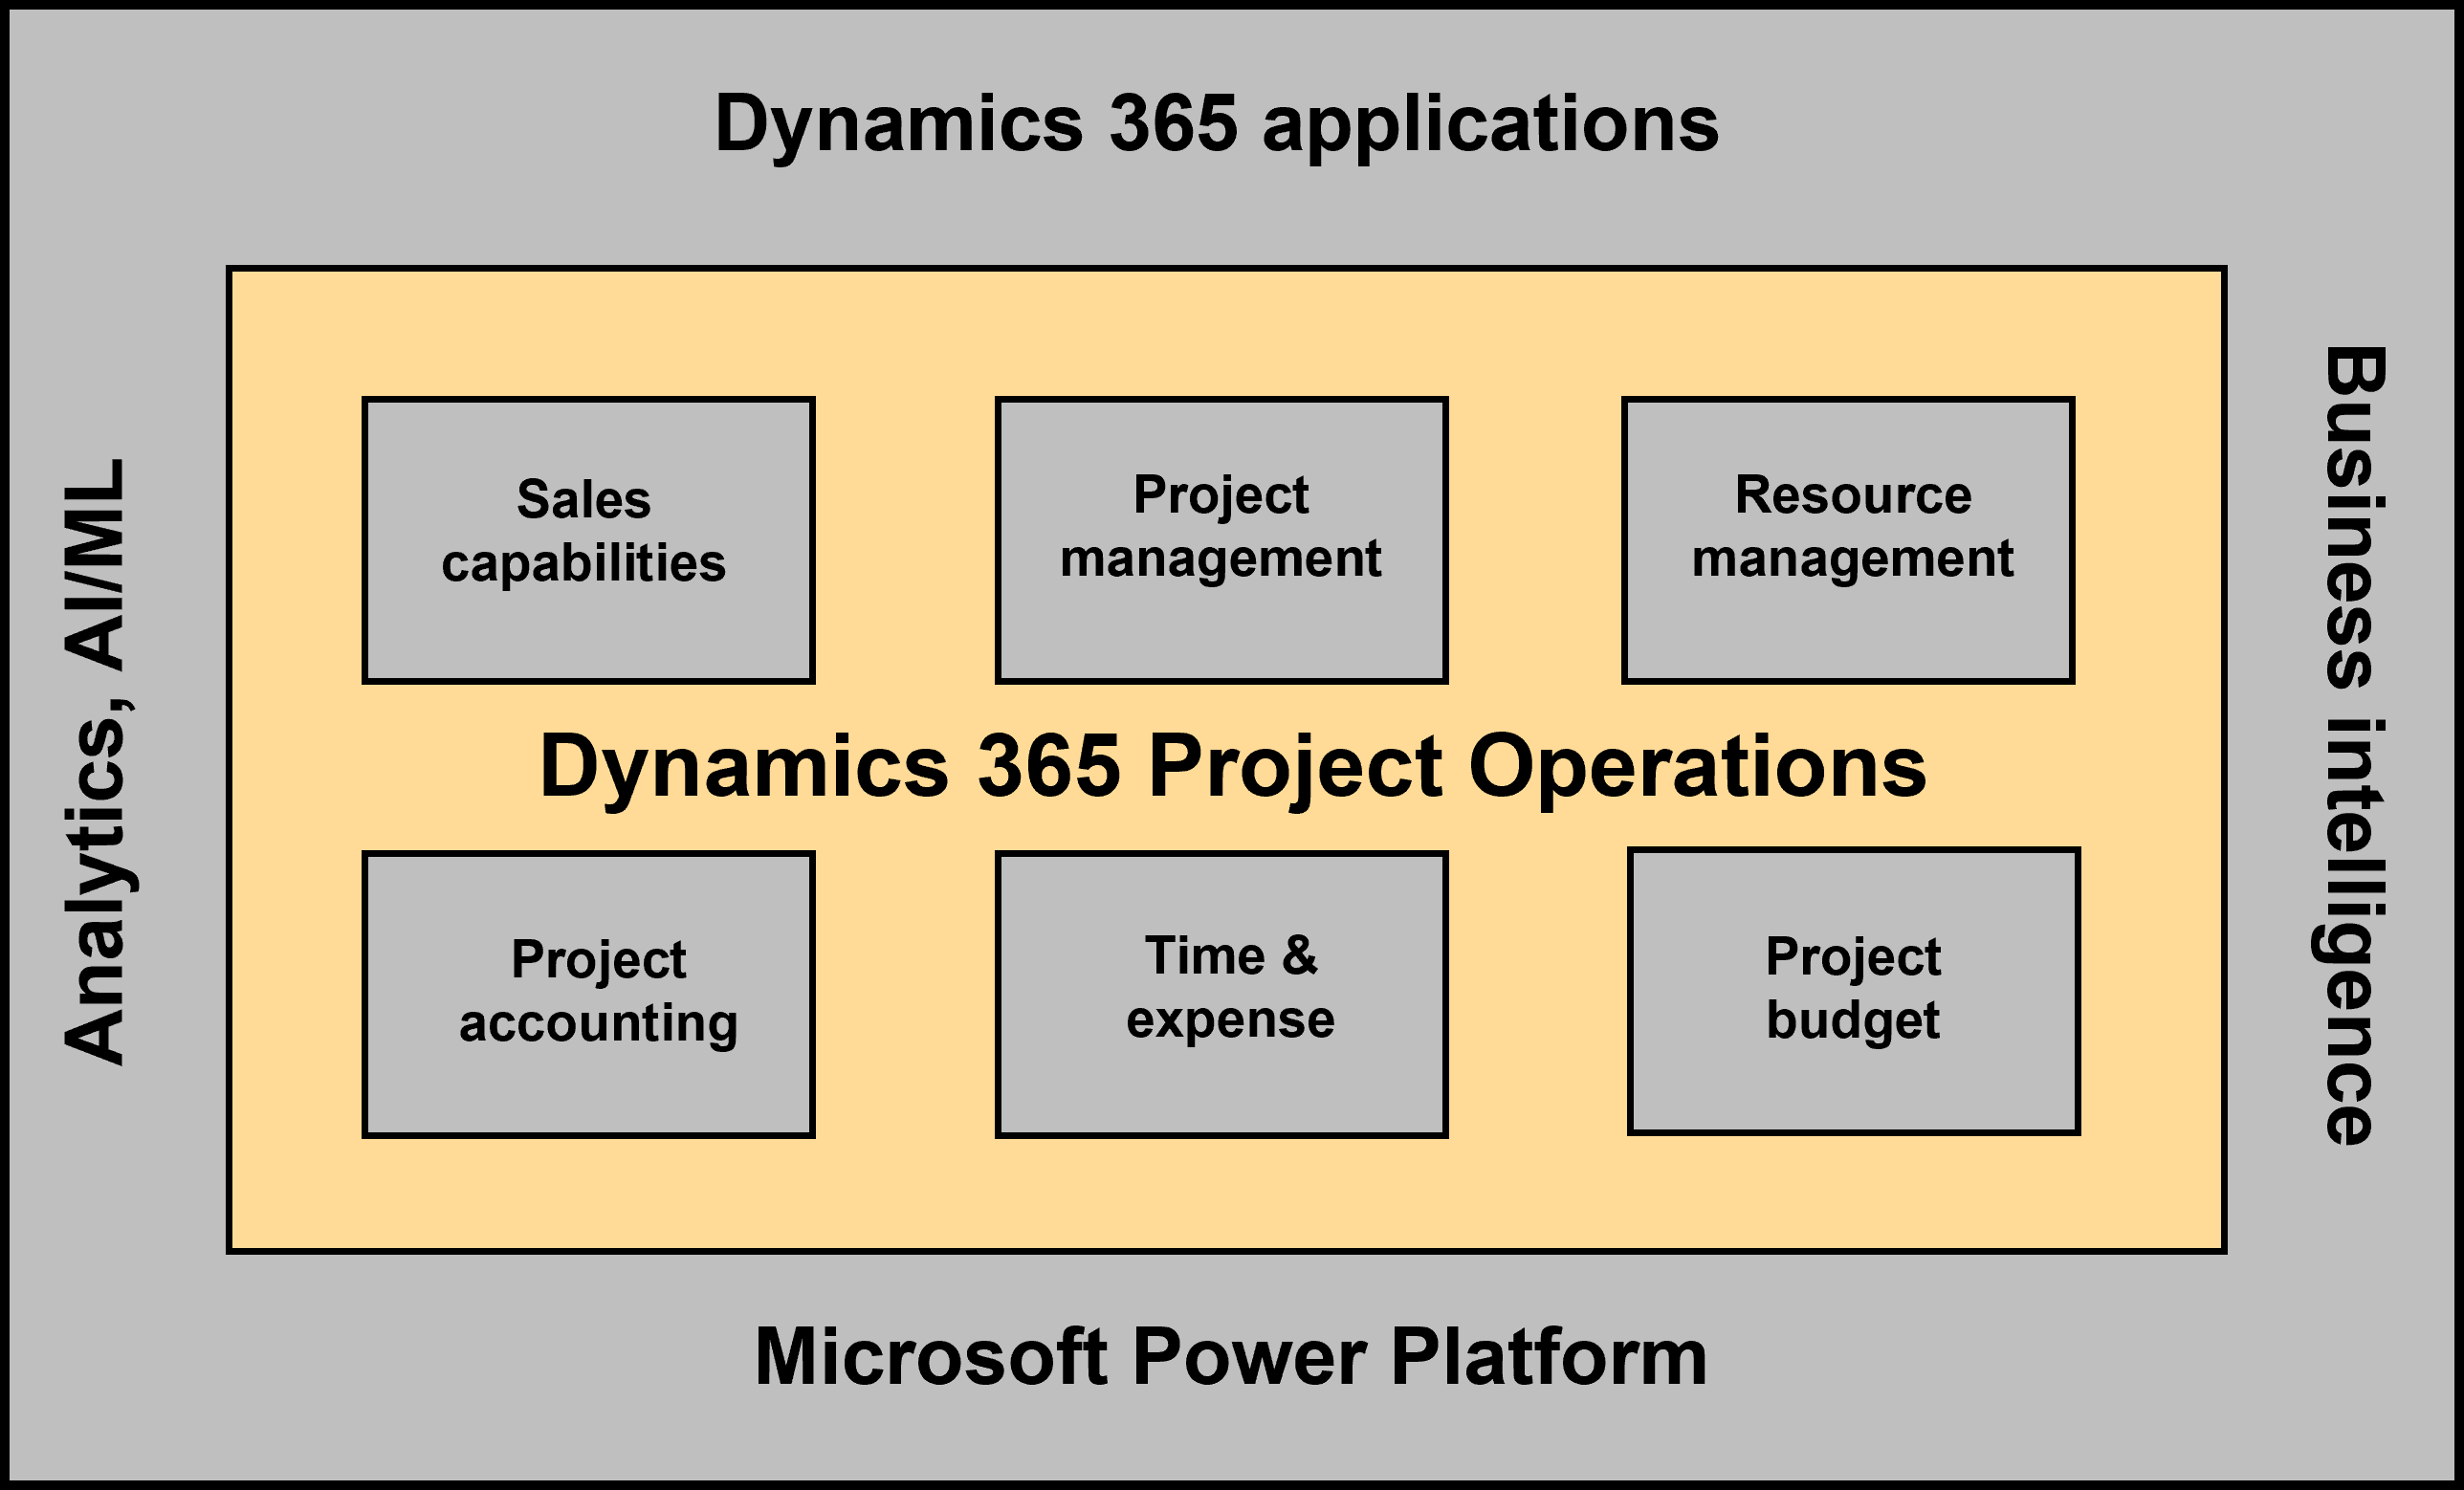 Diagram of Dynamics 365 Project Operation: Sales capabilities, Project management, Resource management, Project accounting, Time & expense, and Project budgeting.